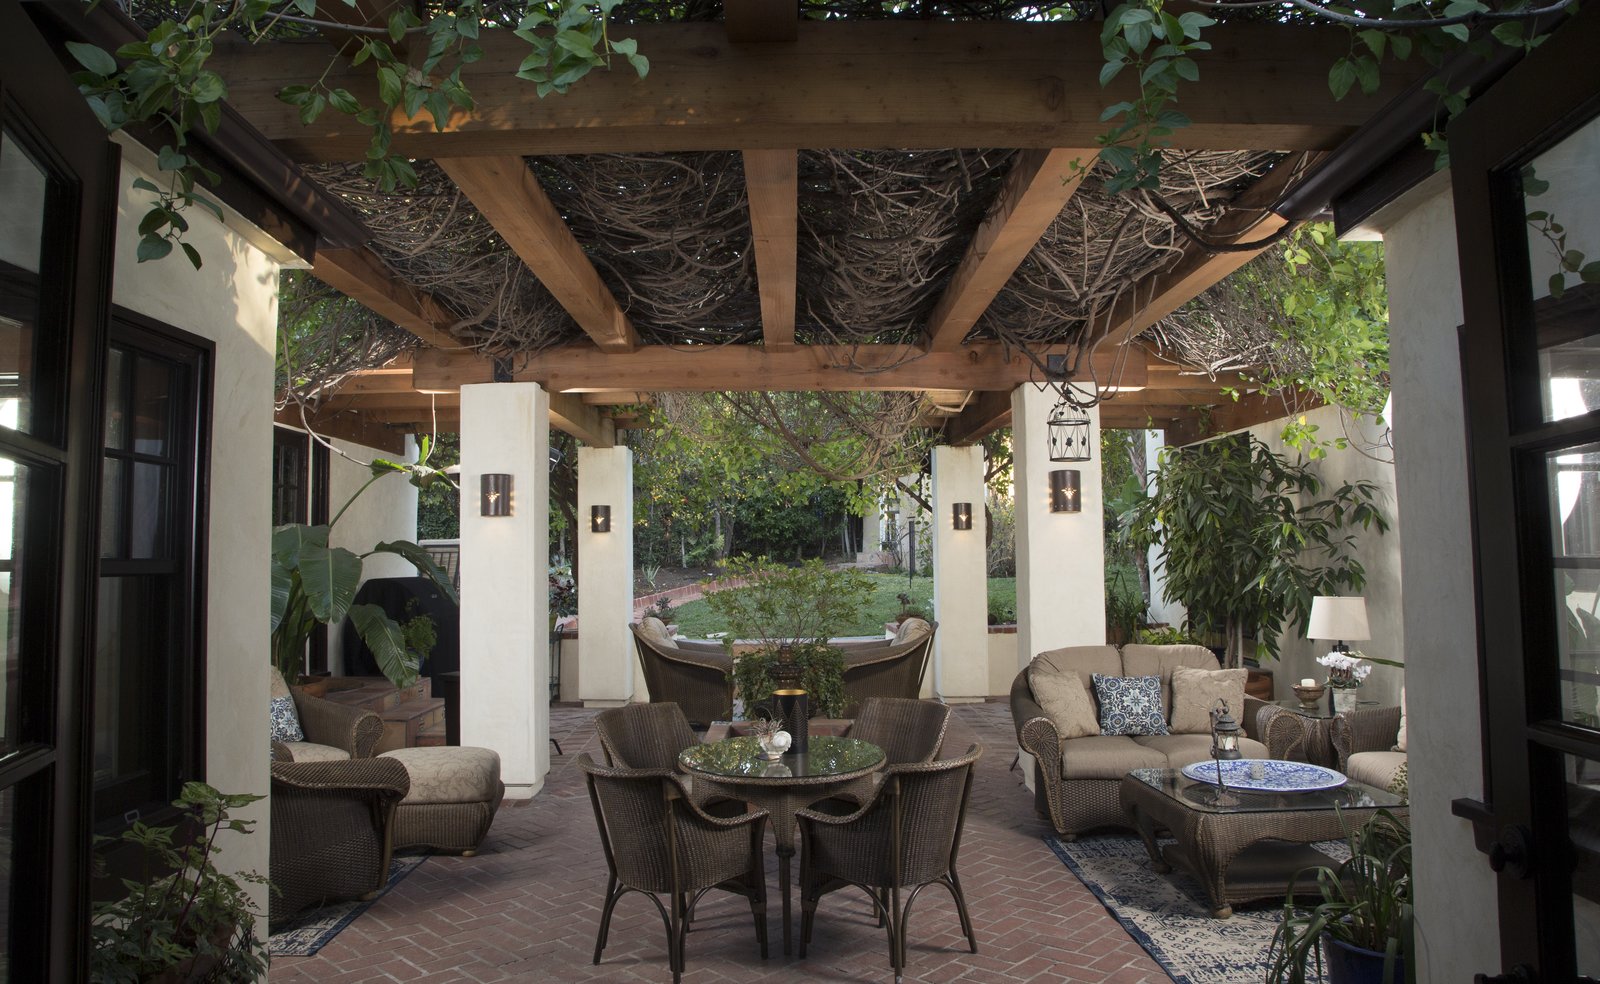 This Stunning Redwood Pergola Brings Classic Charm to its Hollywood Hills Home